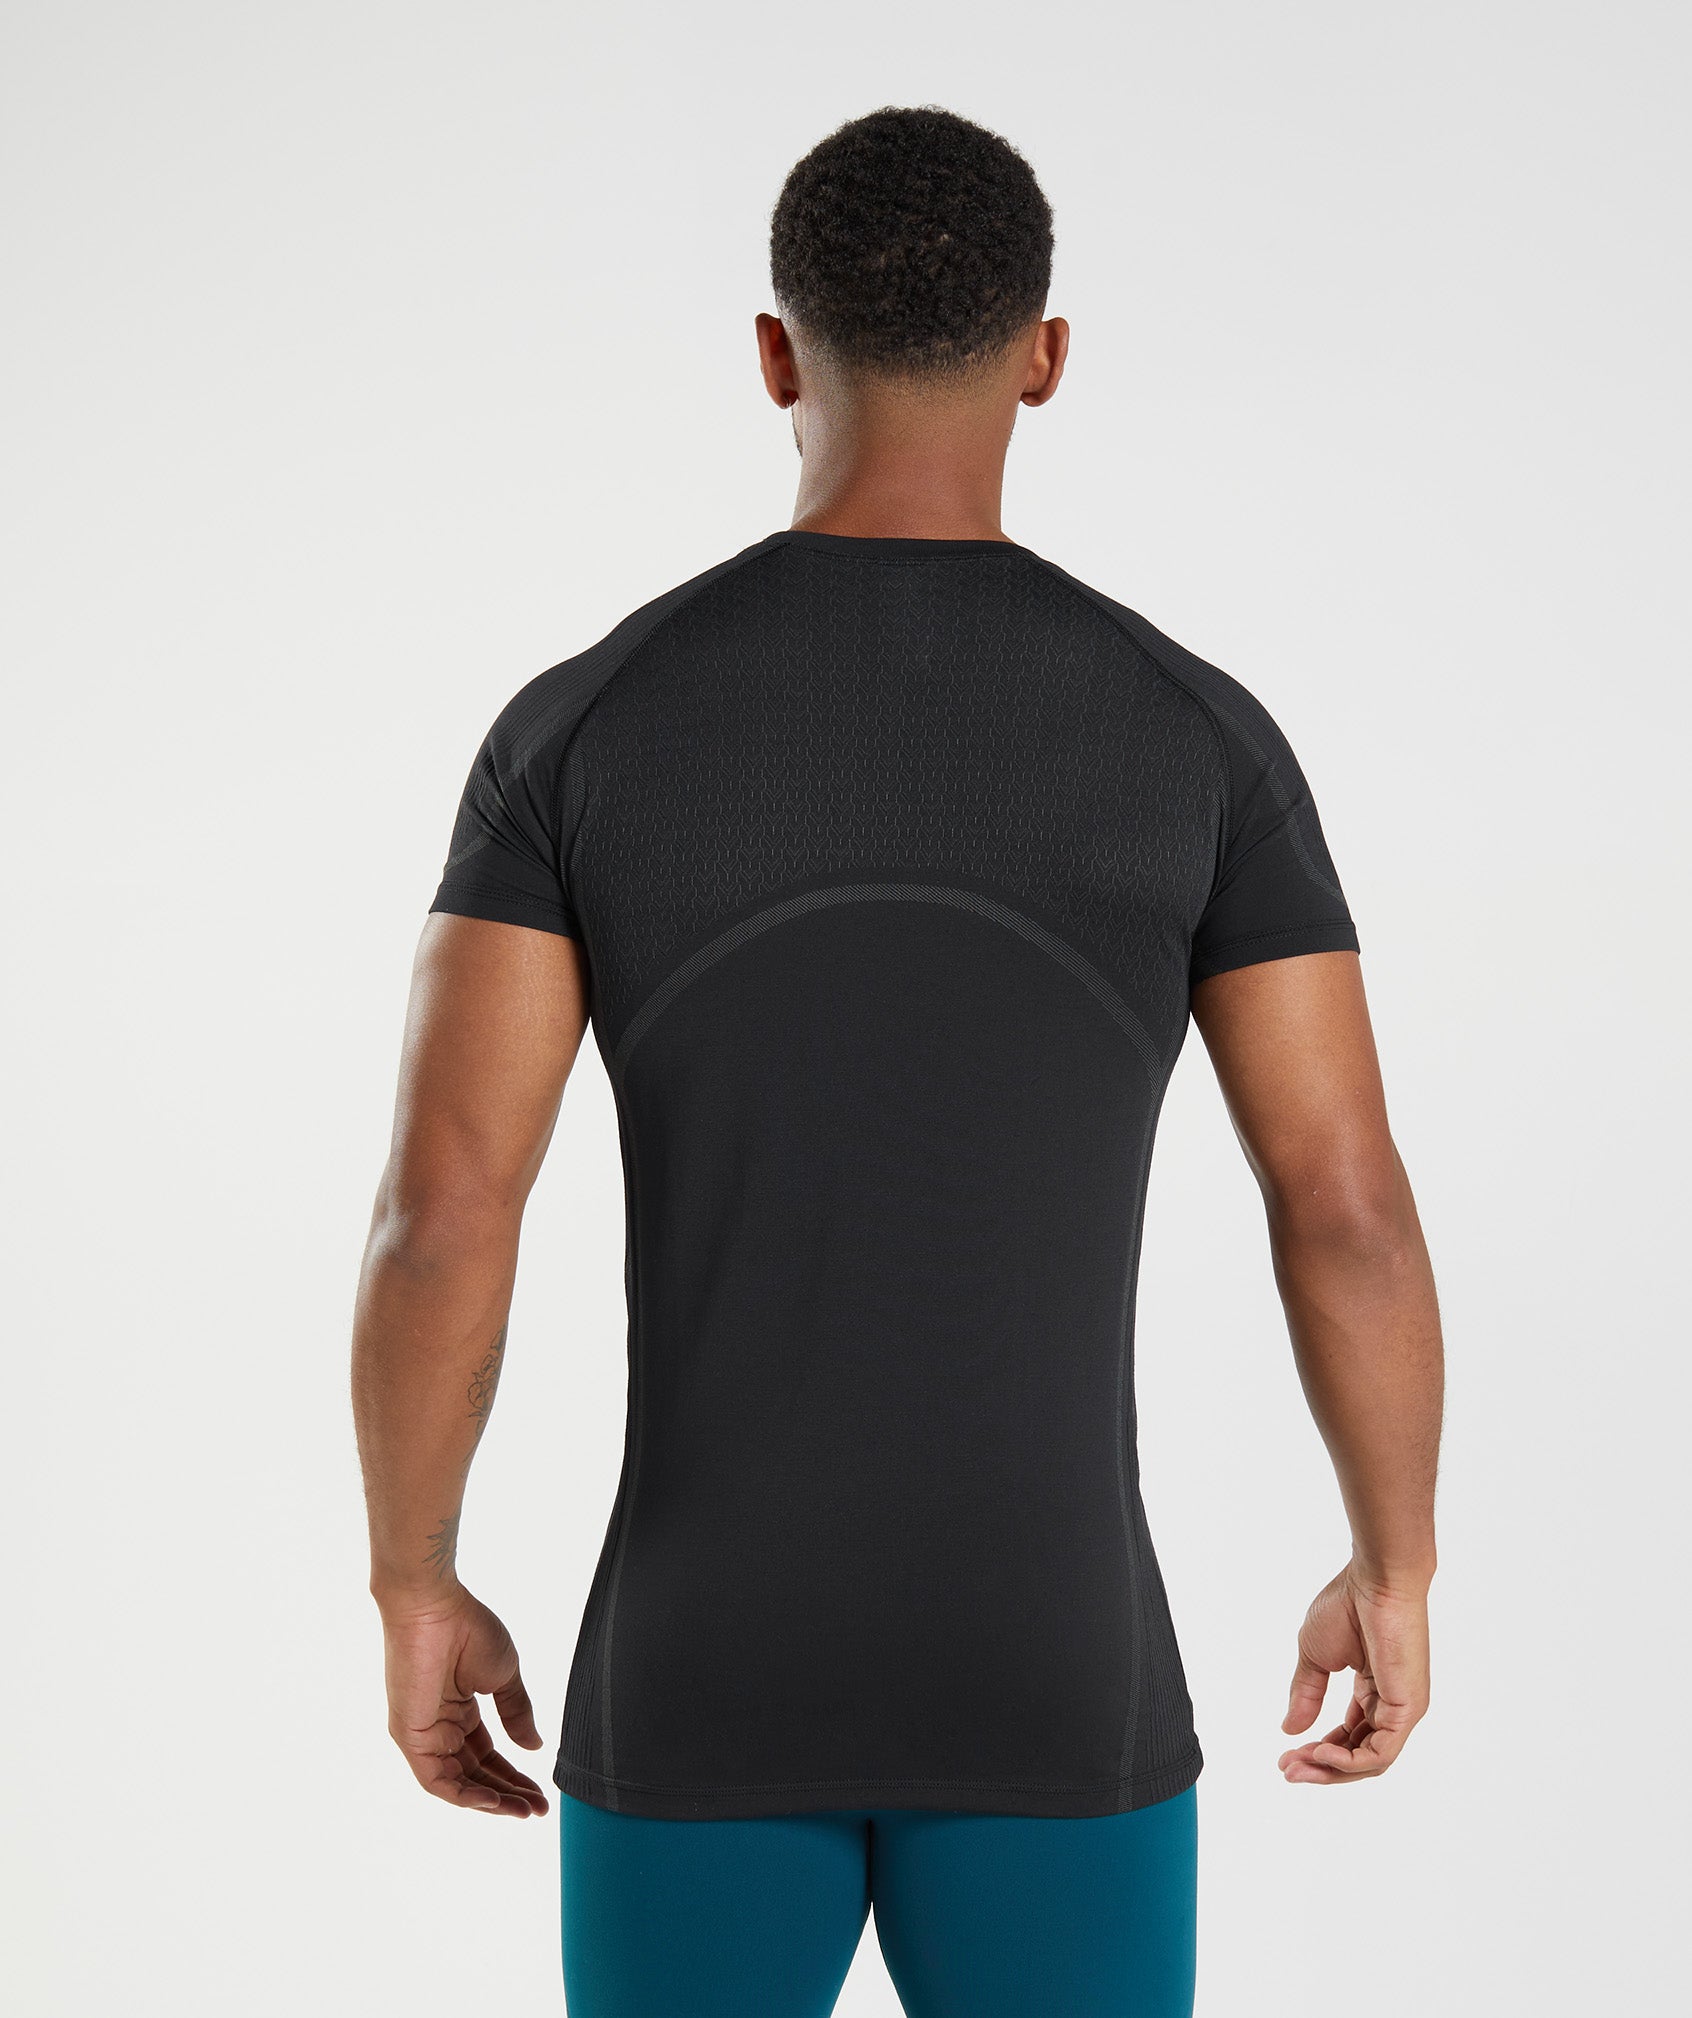 315 Seamless T-Shirt in Black - view 2